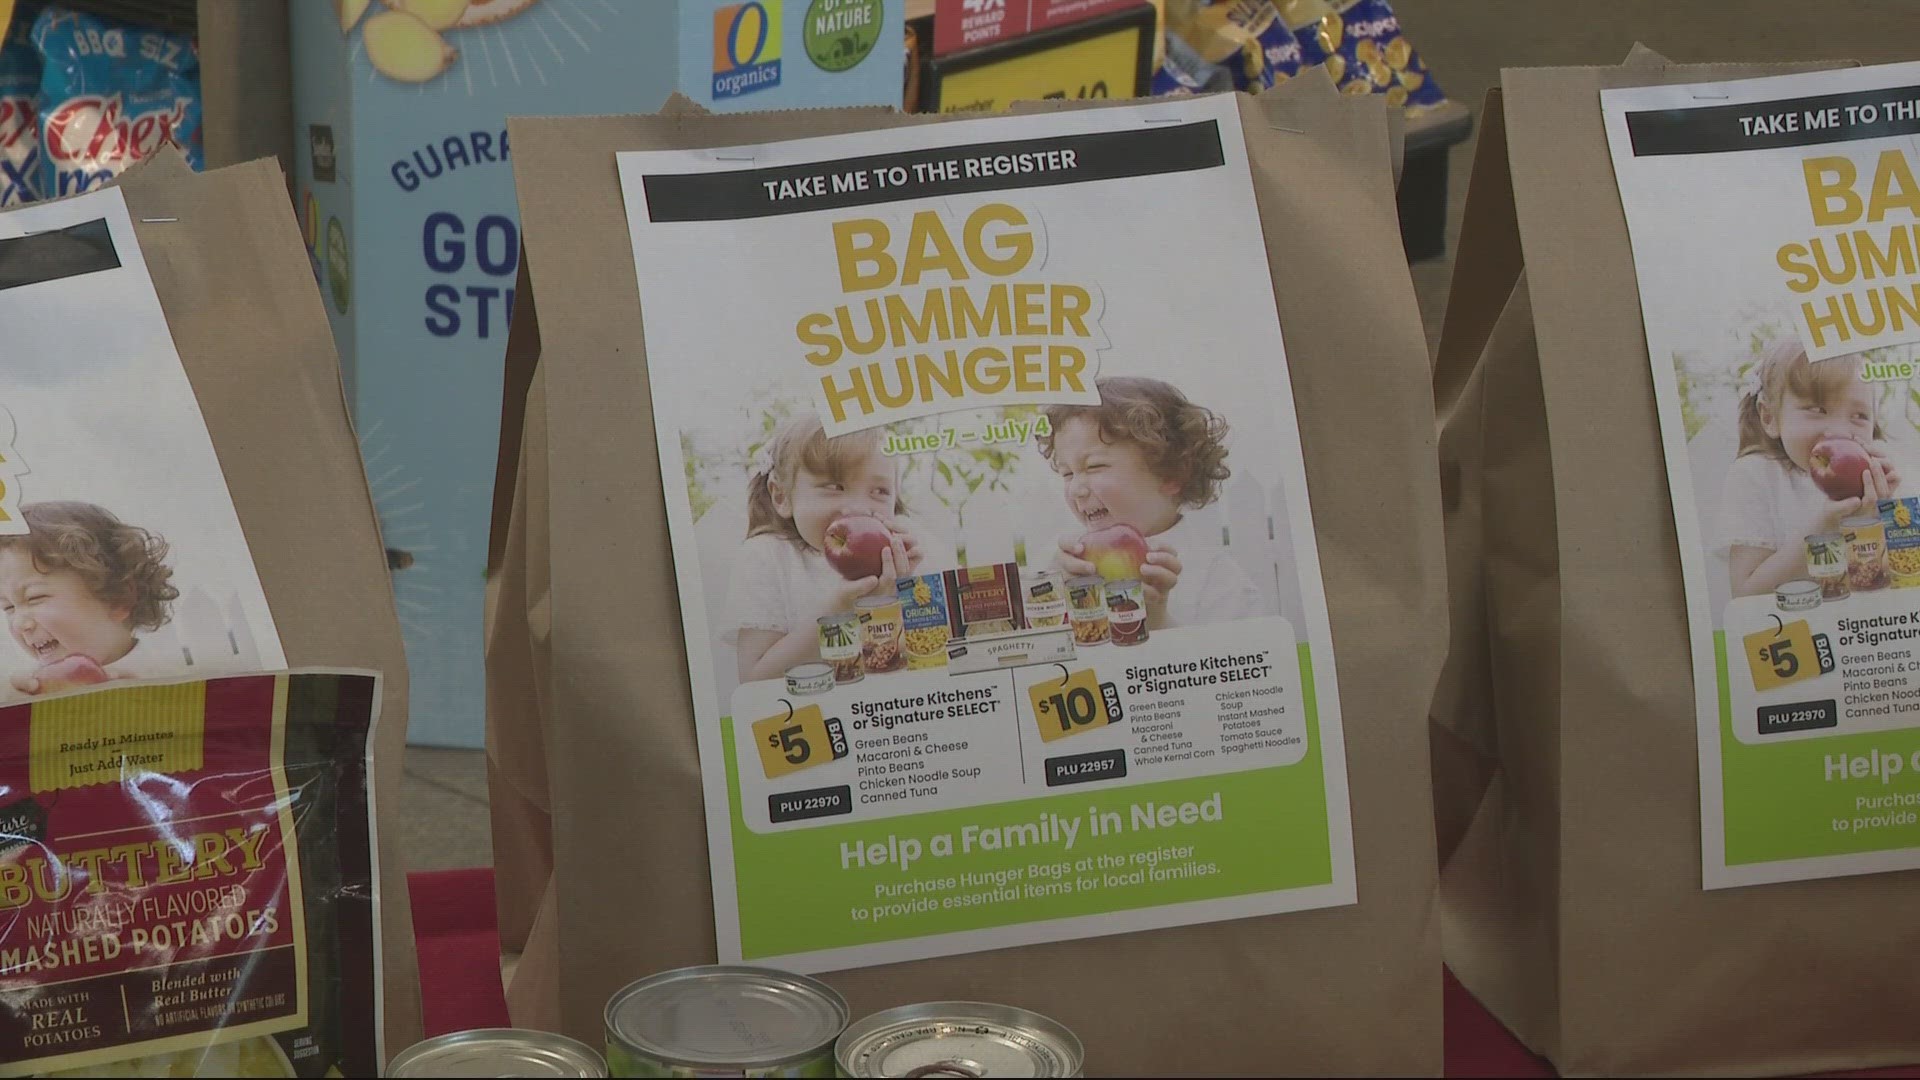 One in every five children in Oregon face food insecurity. Now through July 4, you can donate at Safeway or Albertsons checkout stands to help us Bag Summer Hunger.